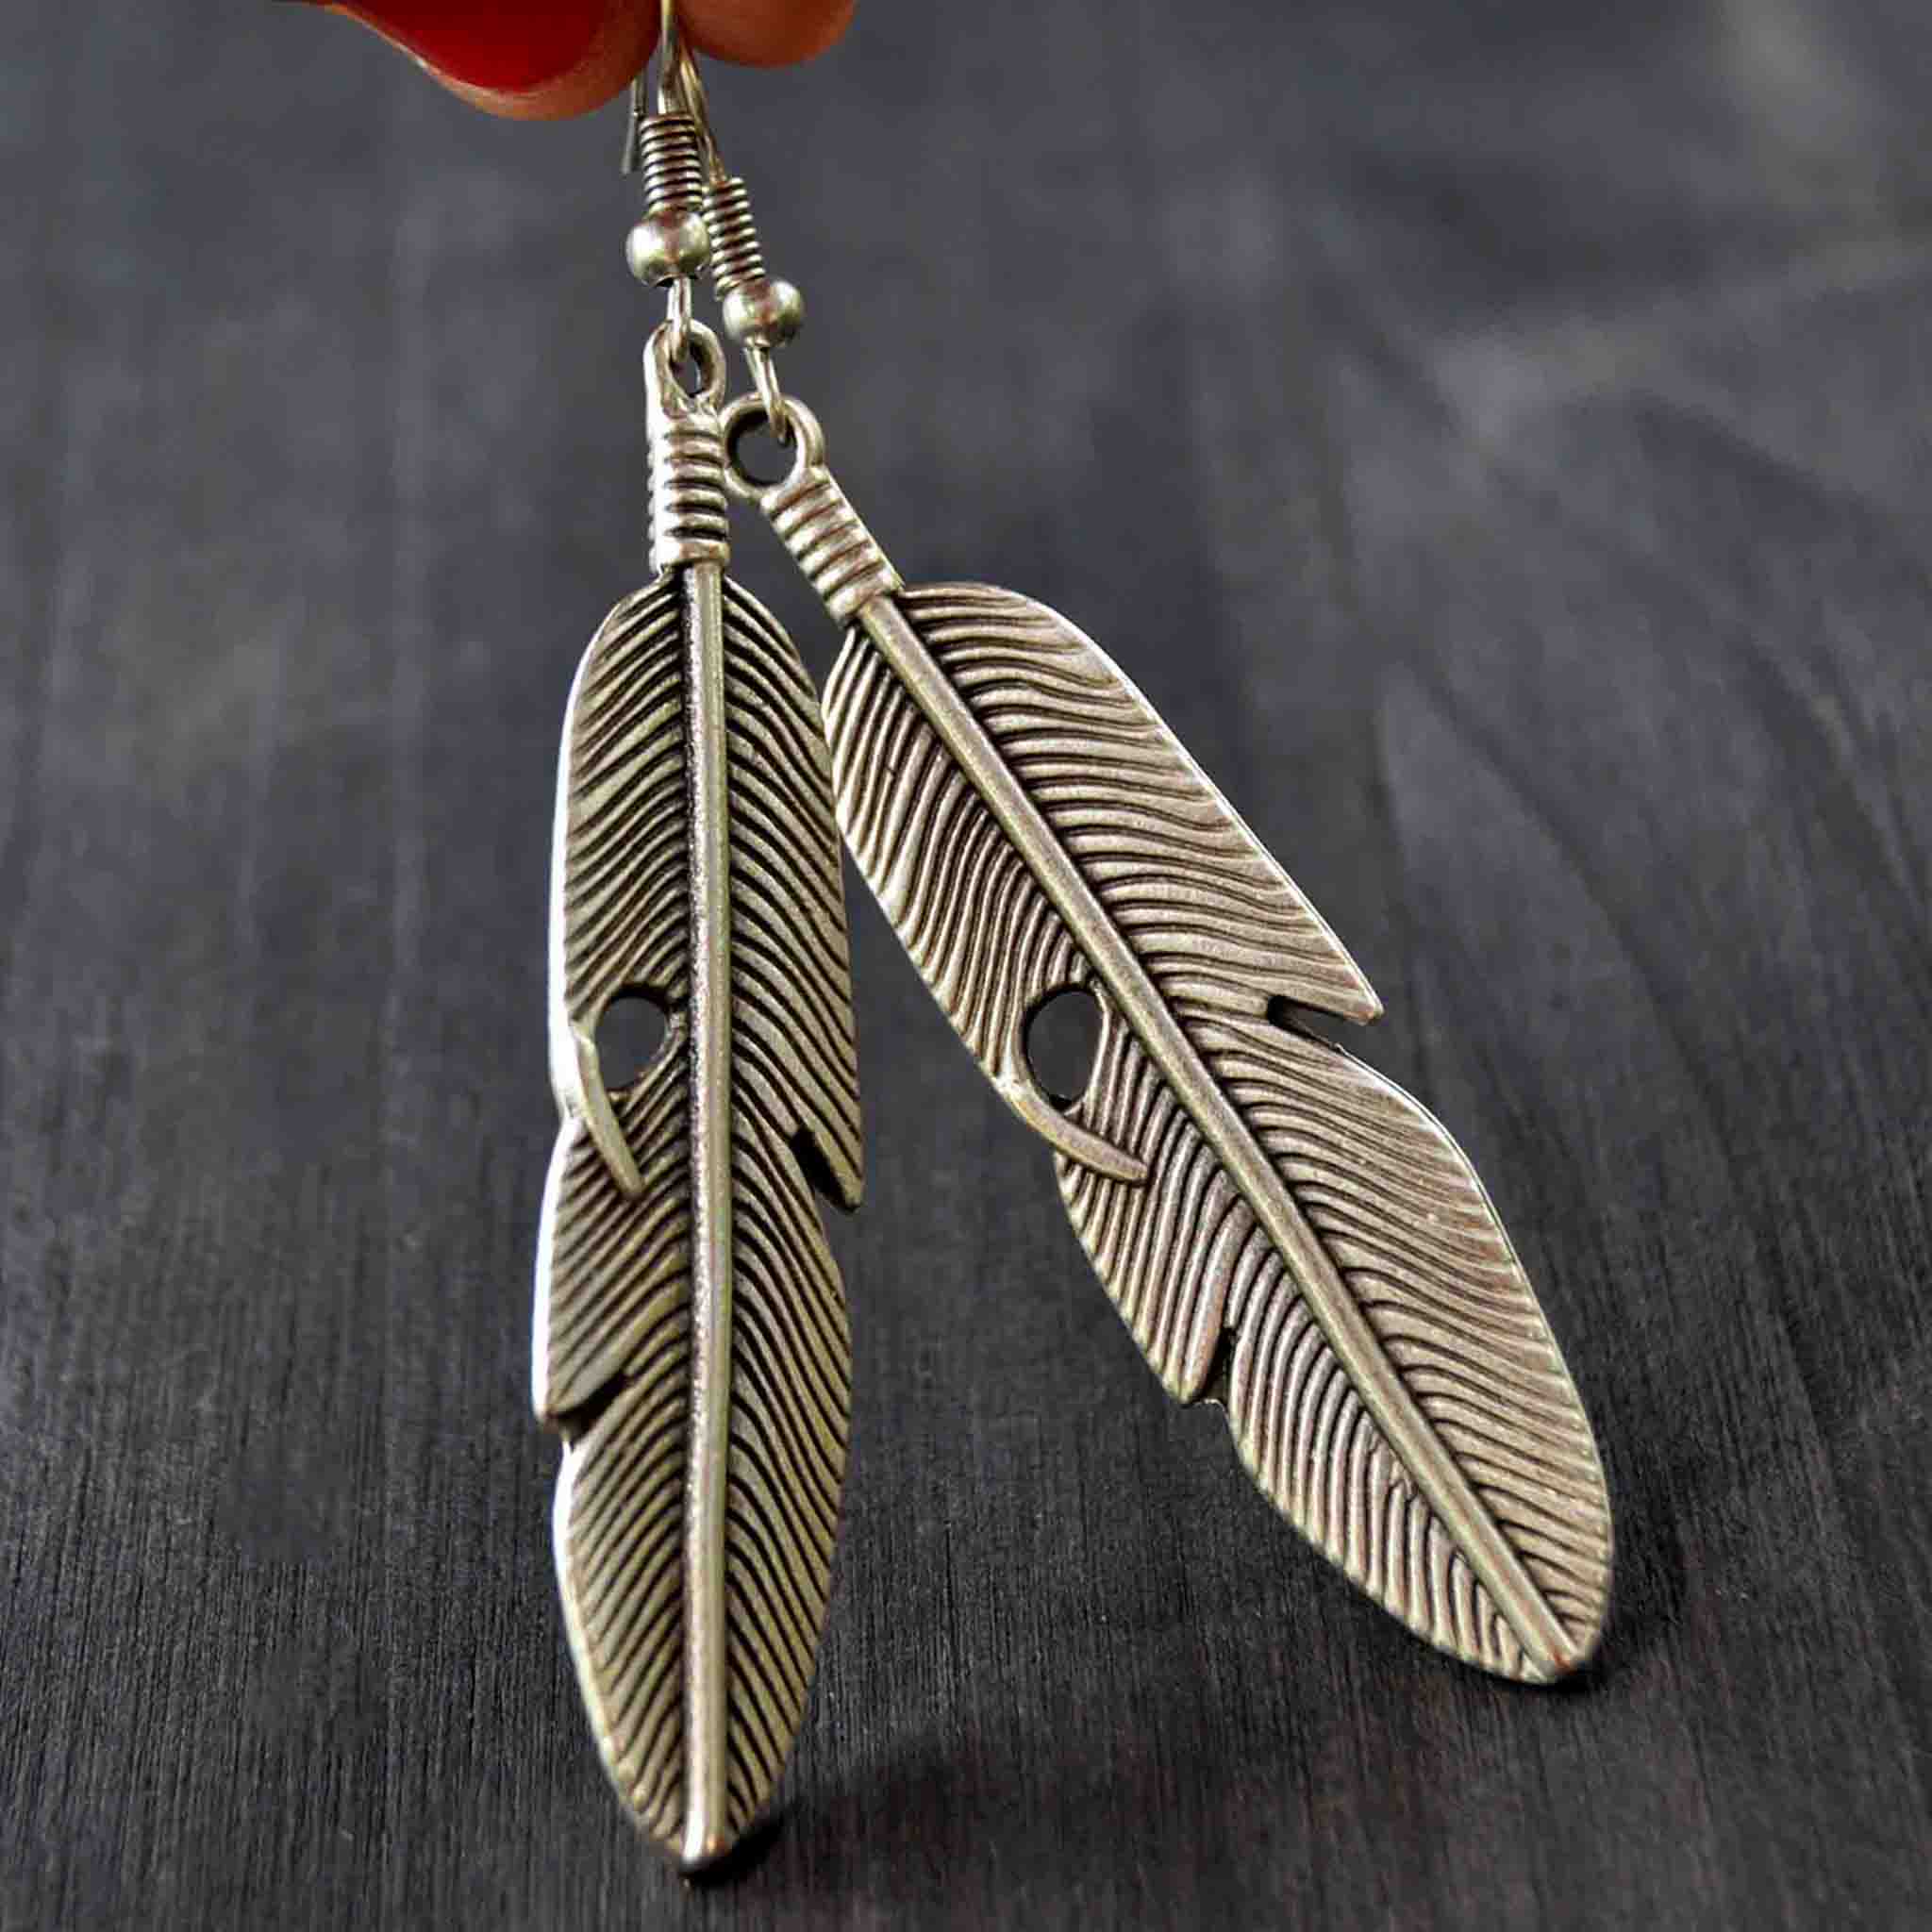 Long silver feather earrings on gray background